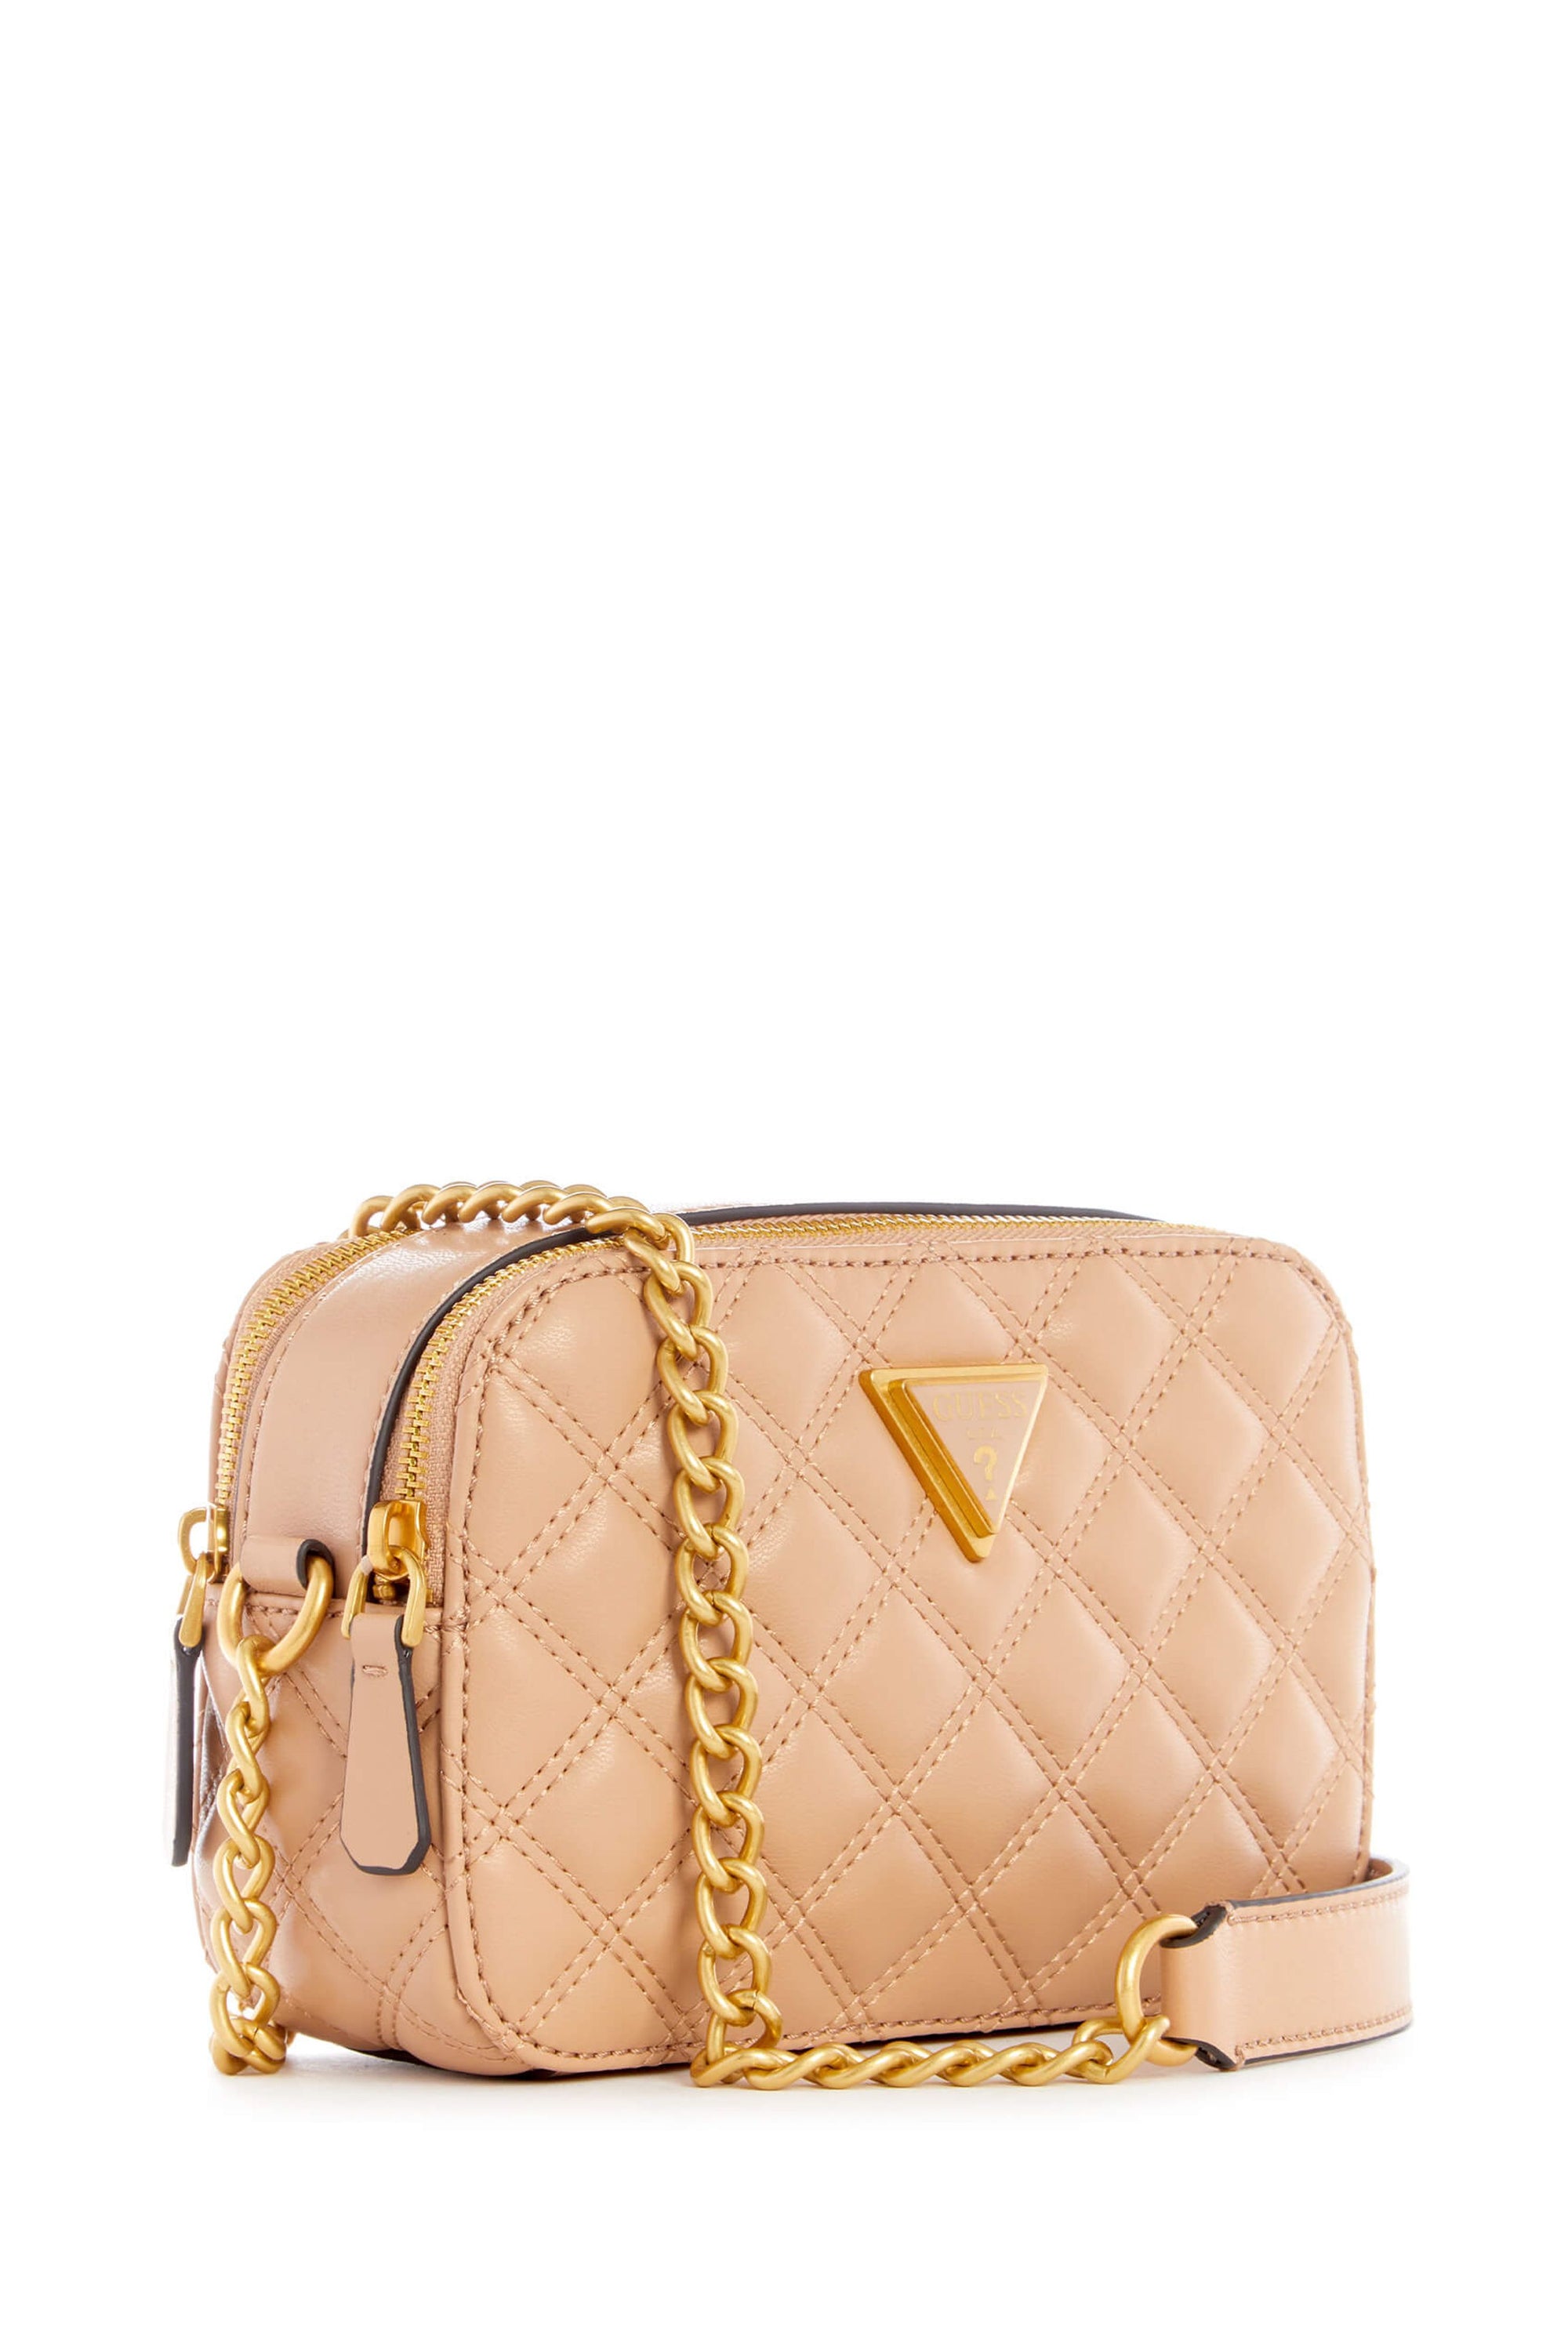 GUESS Giully Tote, Beige: Handbags